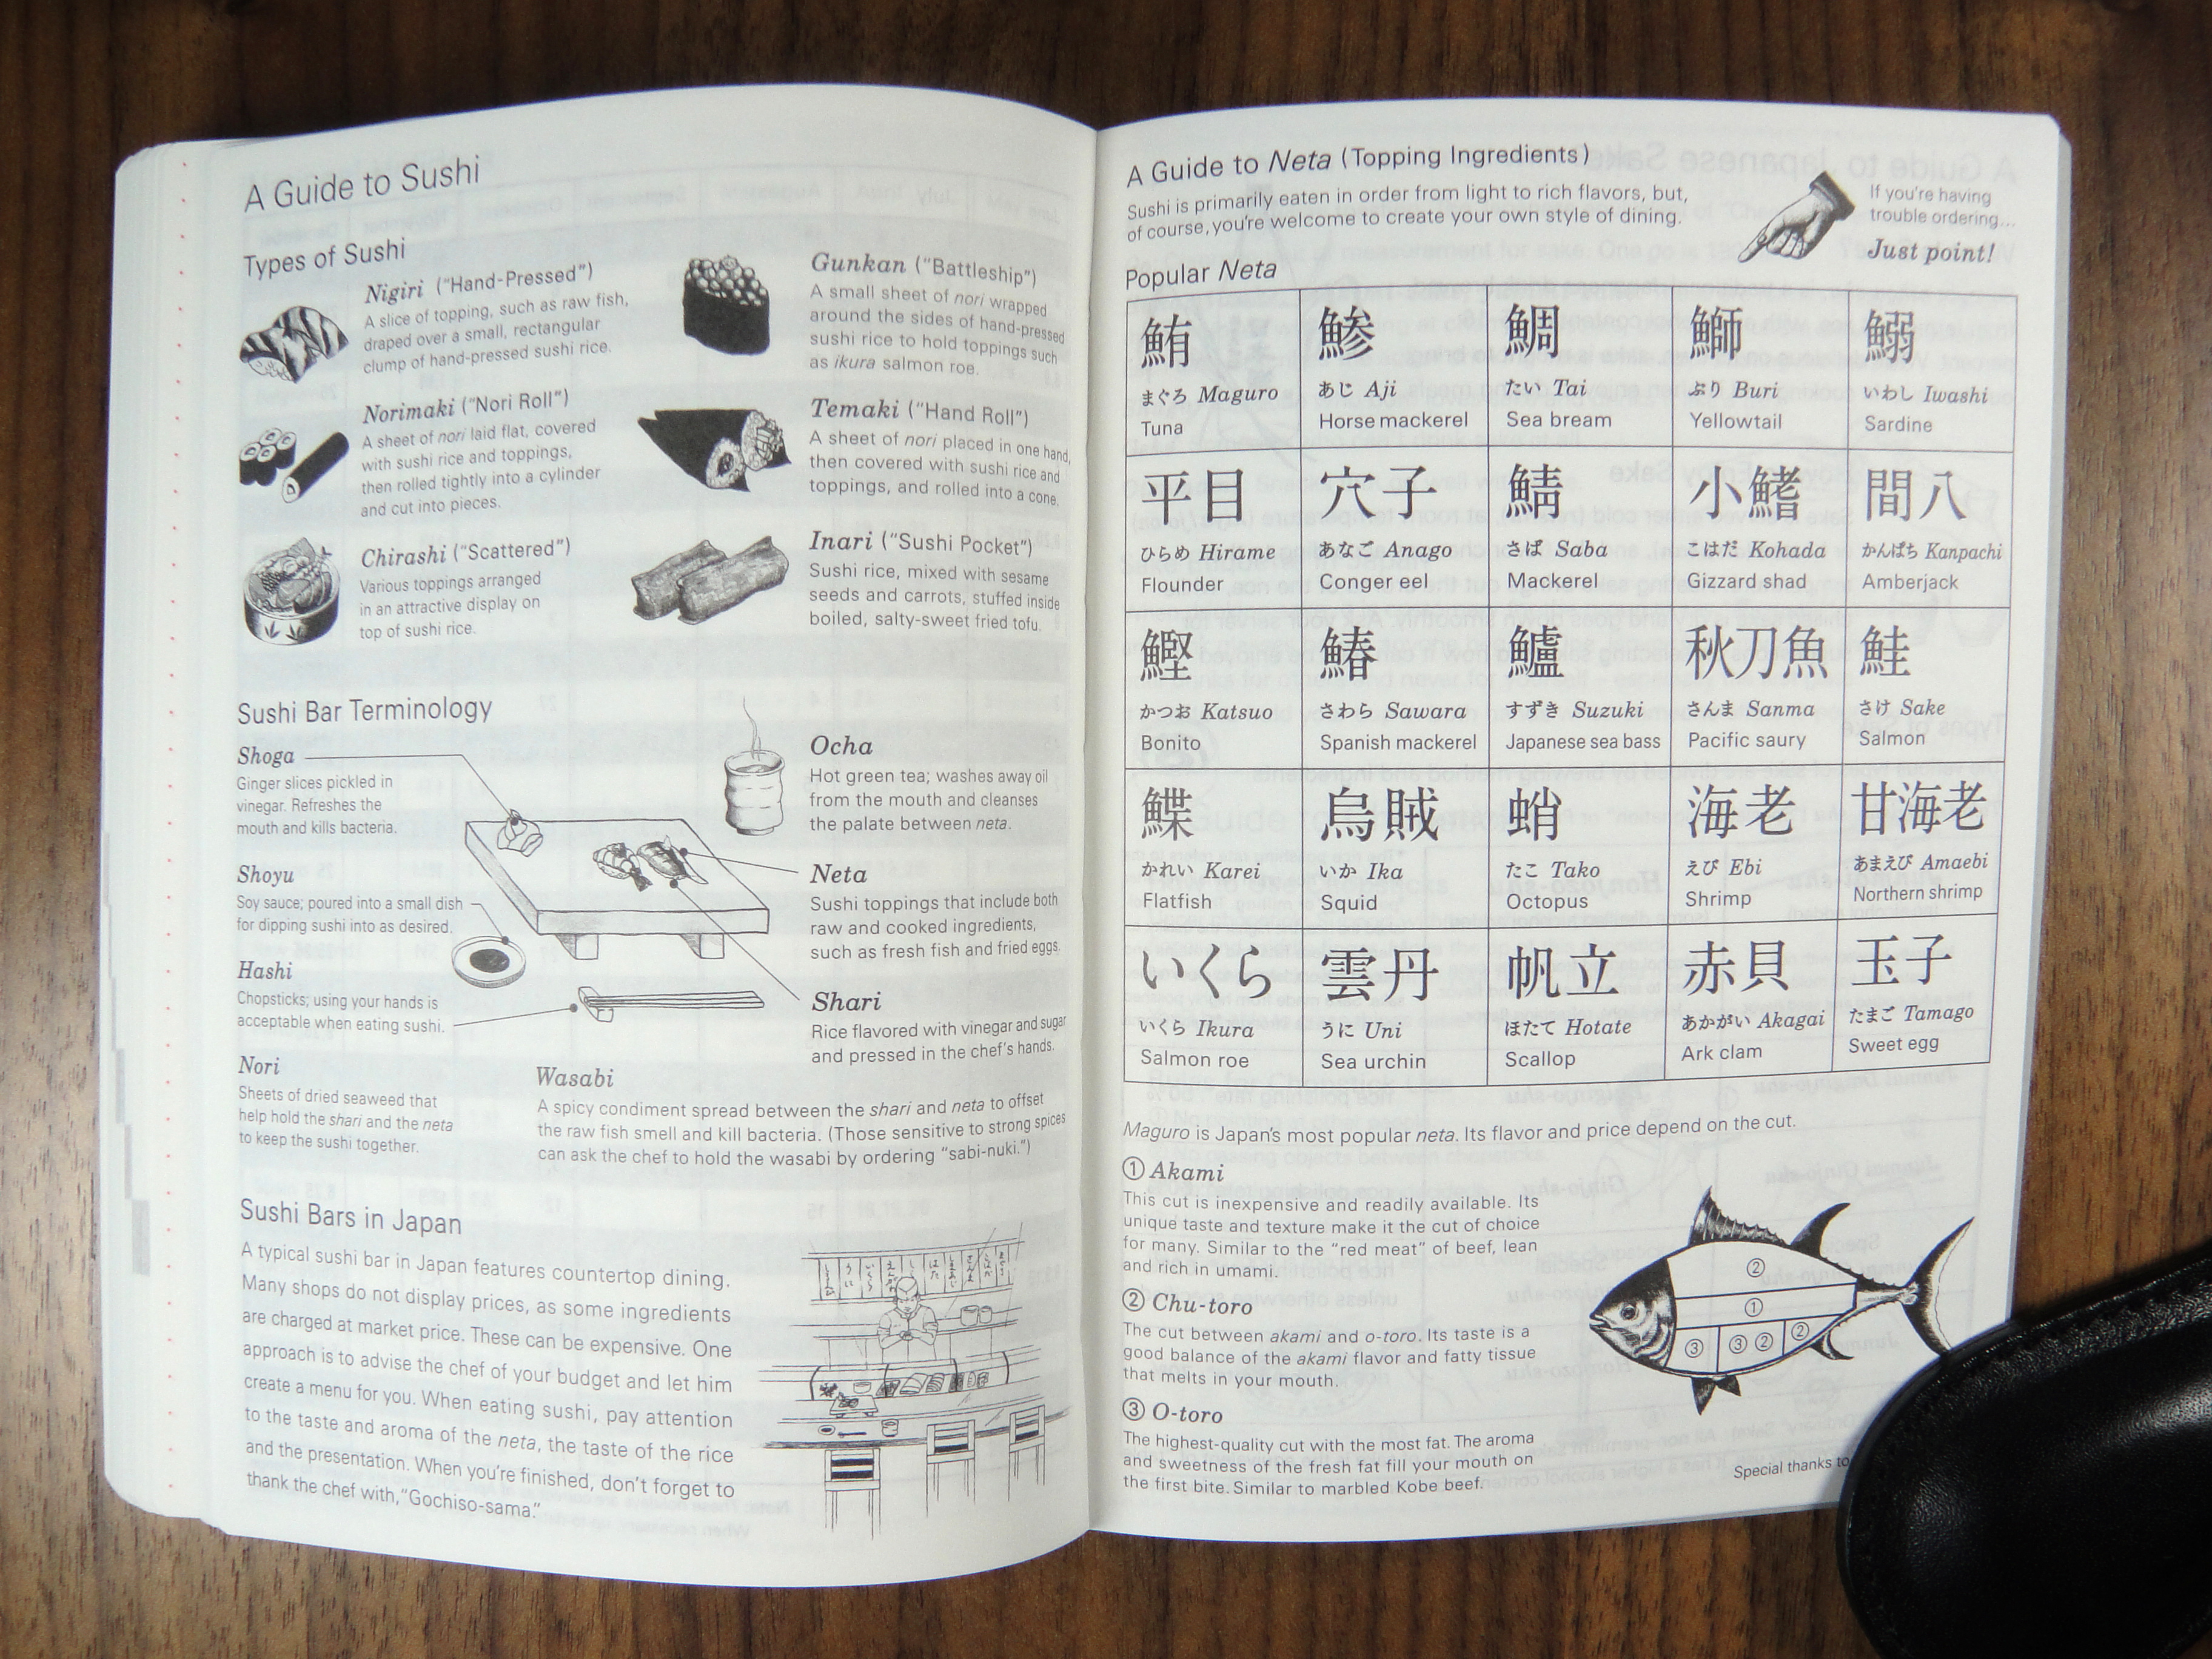 Sushi Guide...I particularly like the part on the top right pages that says "If you are having trouble ordering....Just point!"